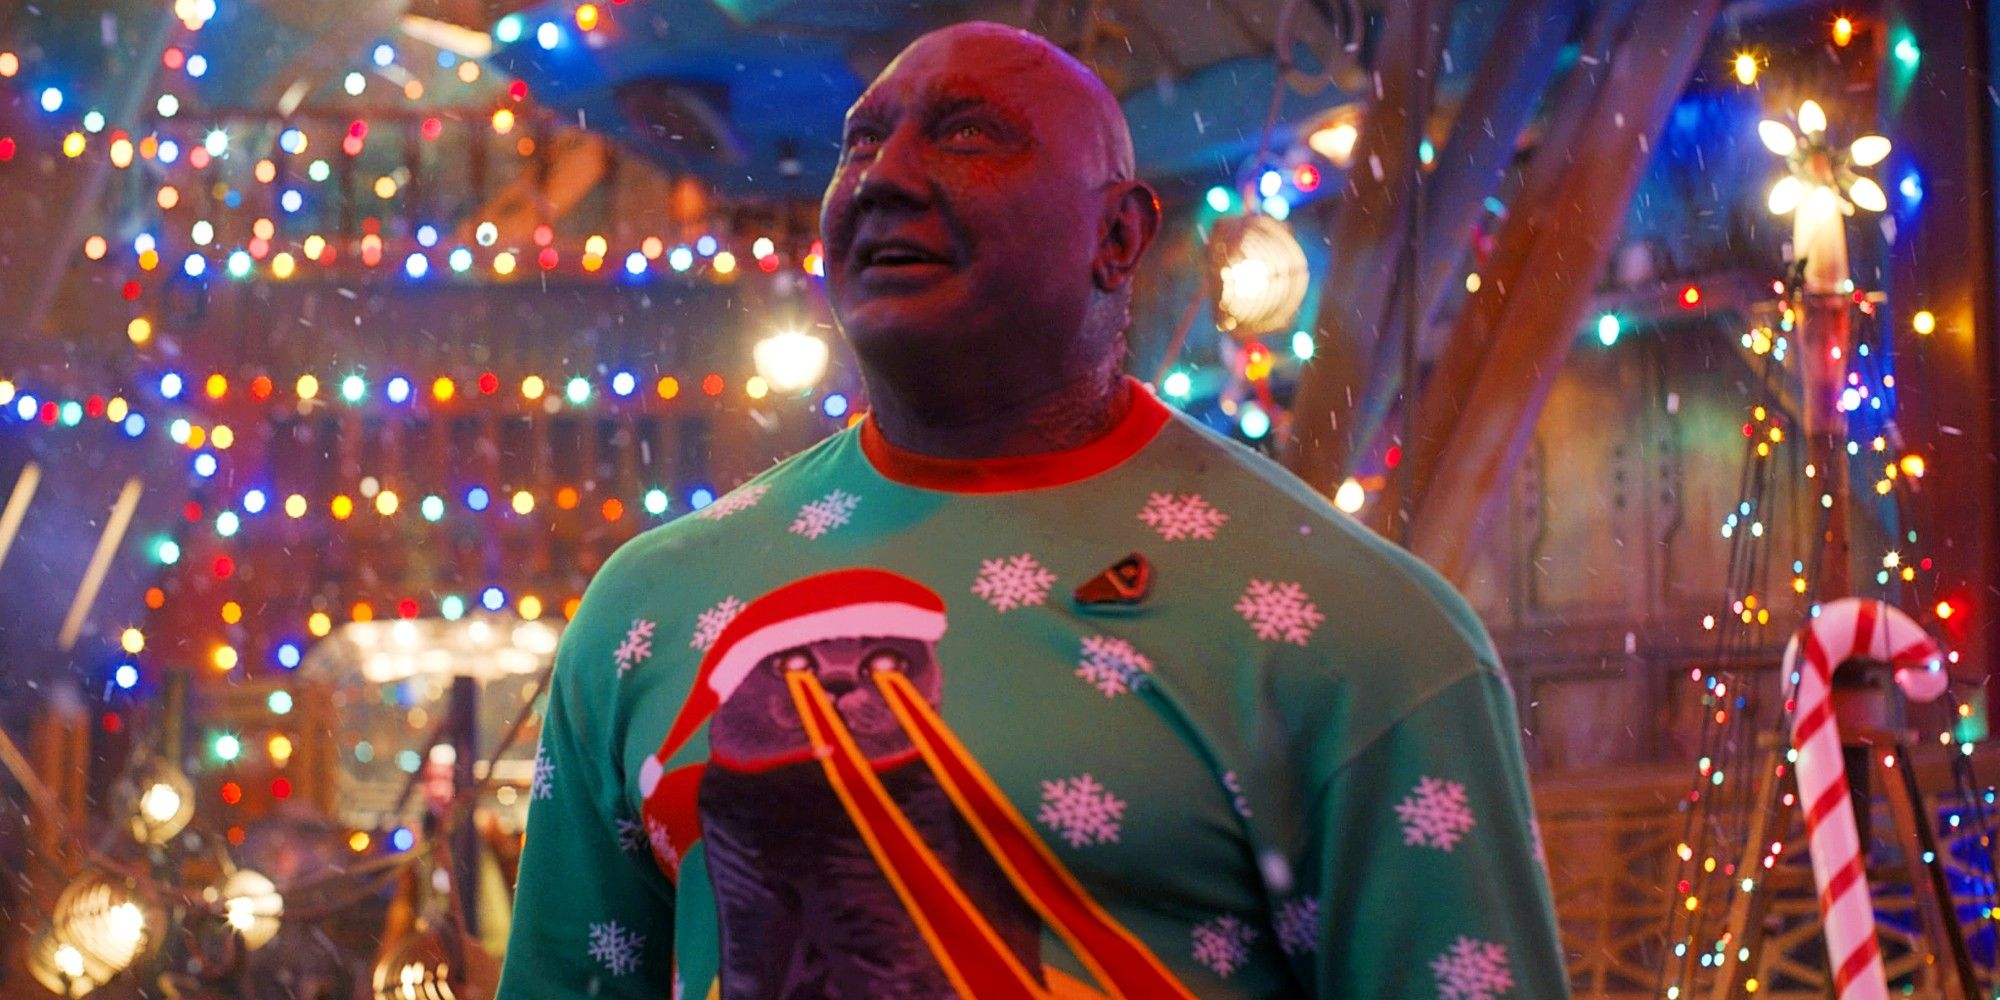 Dave Bautista as Drax wearing a Christmas sweater in the Guardians of the Galaxy Holiday Special